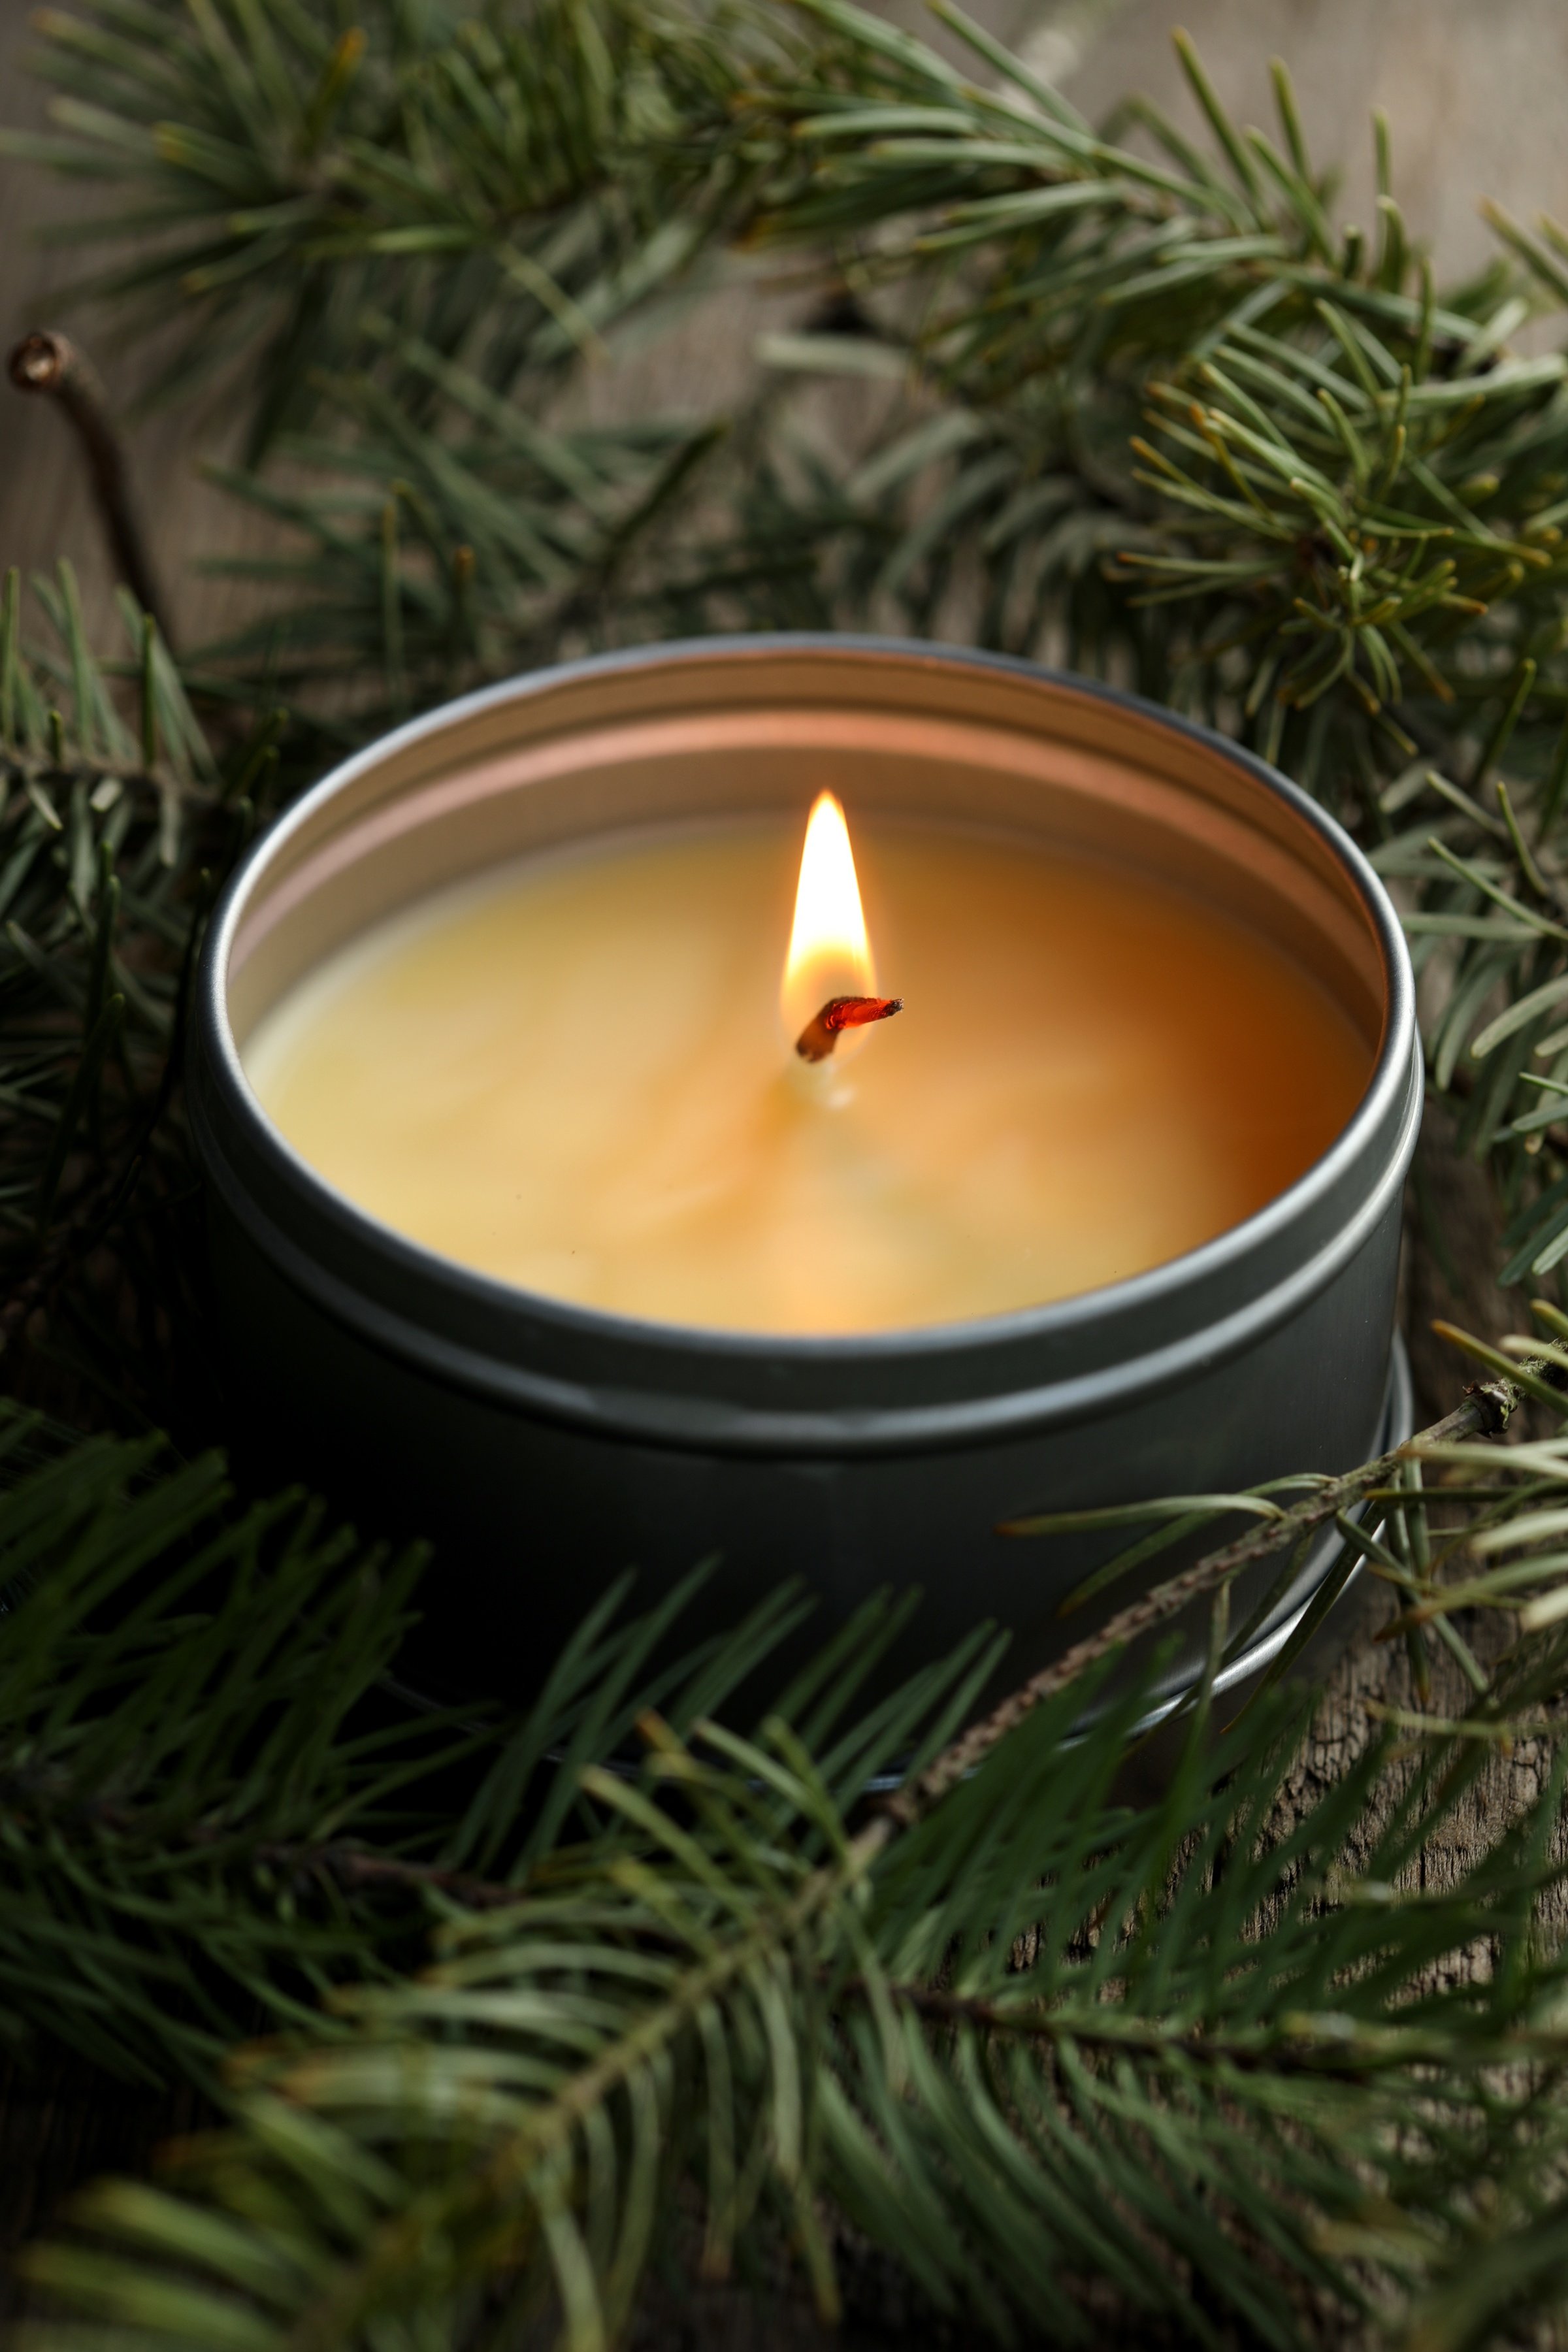 How To Make Your Own Candles with Natural Wax